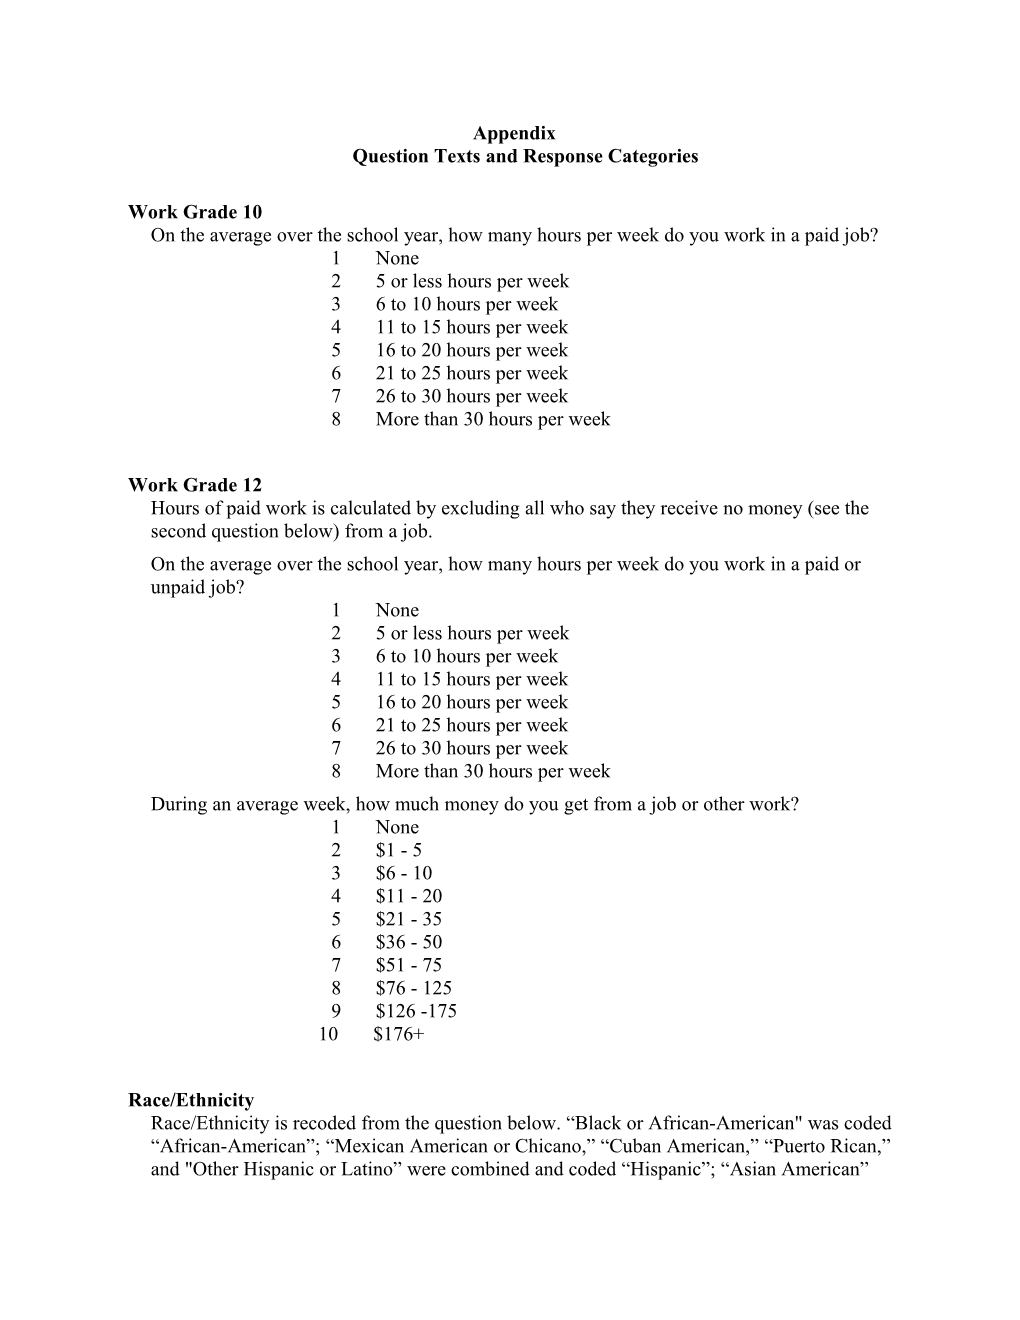 Question Texts and Response Categories